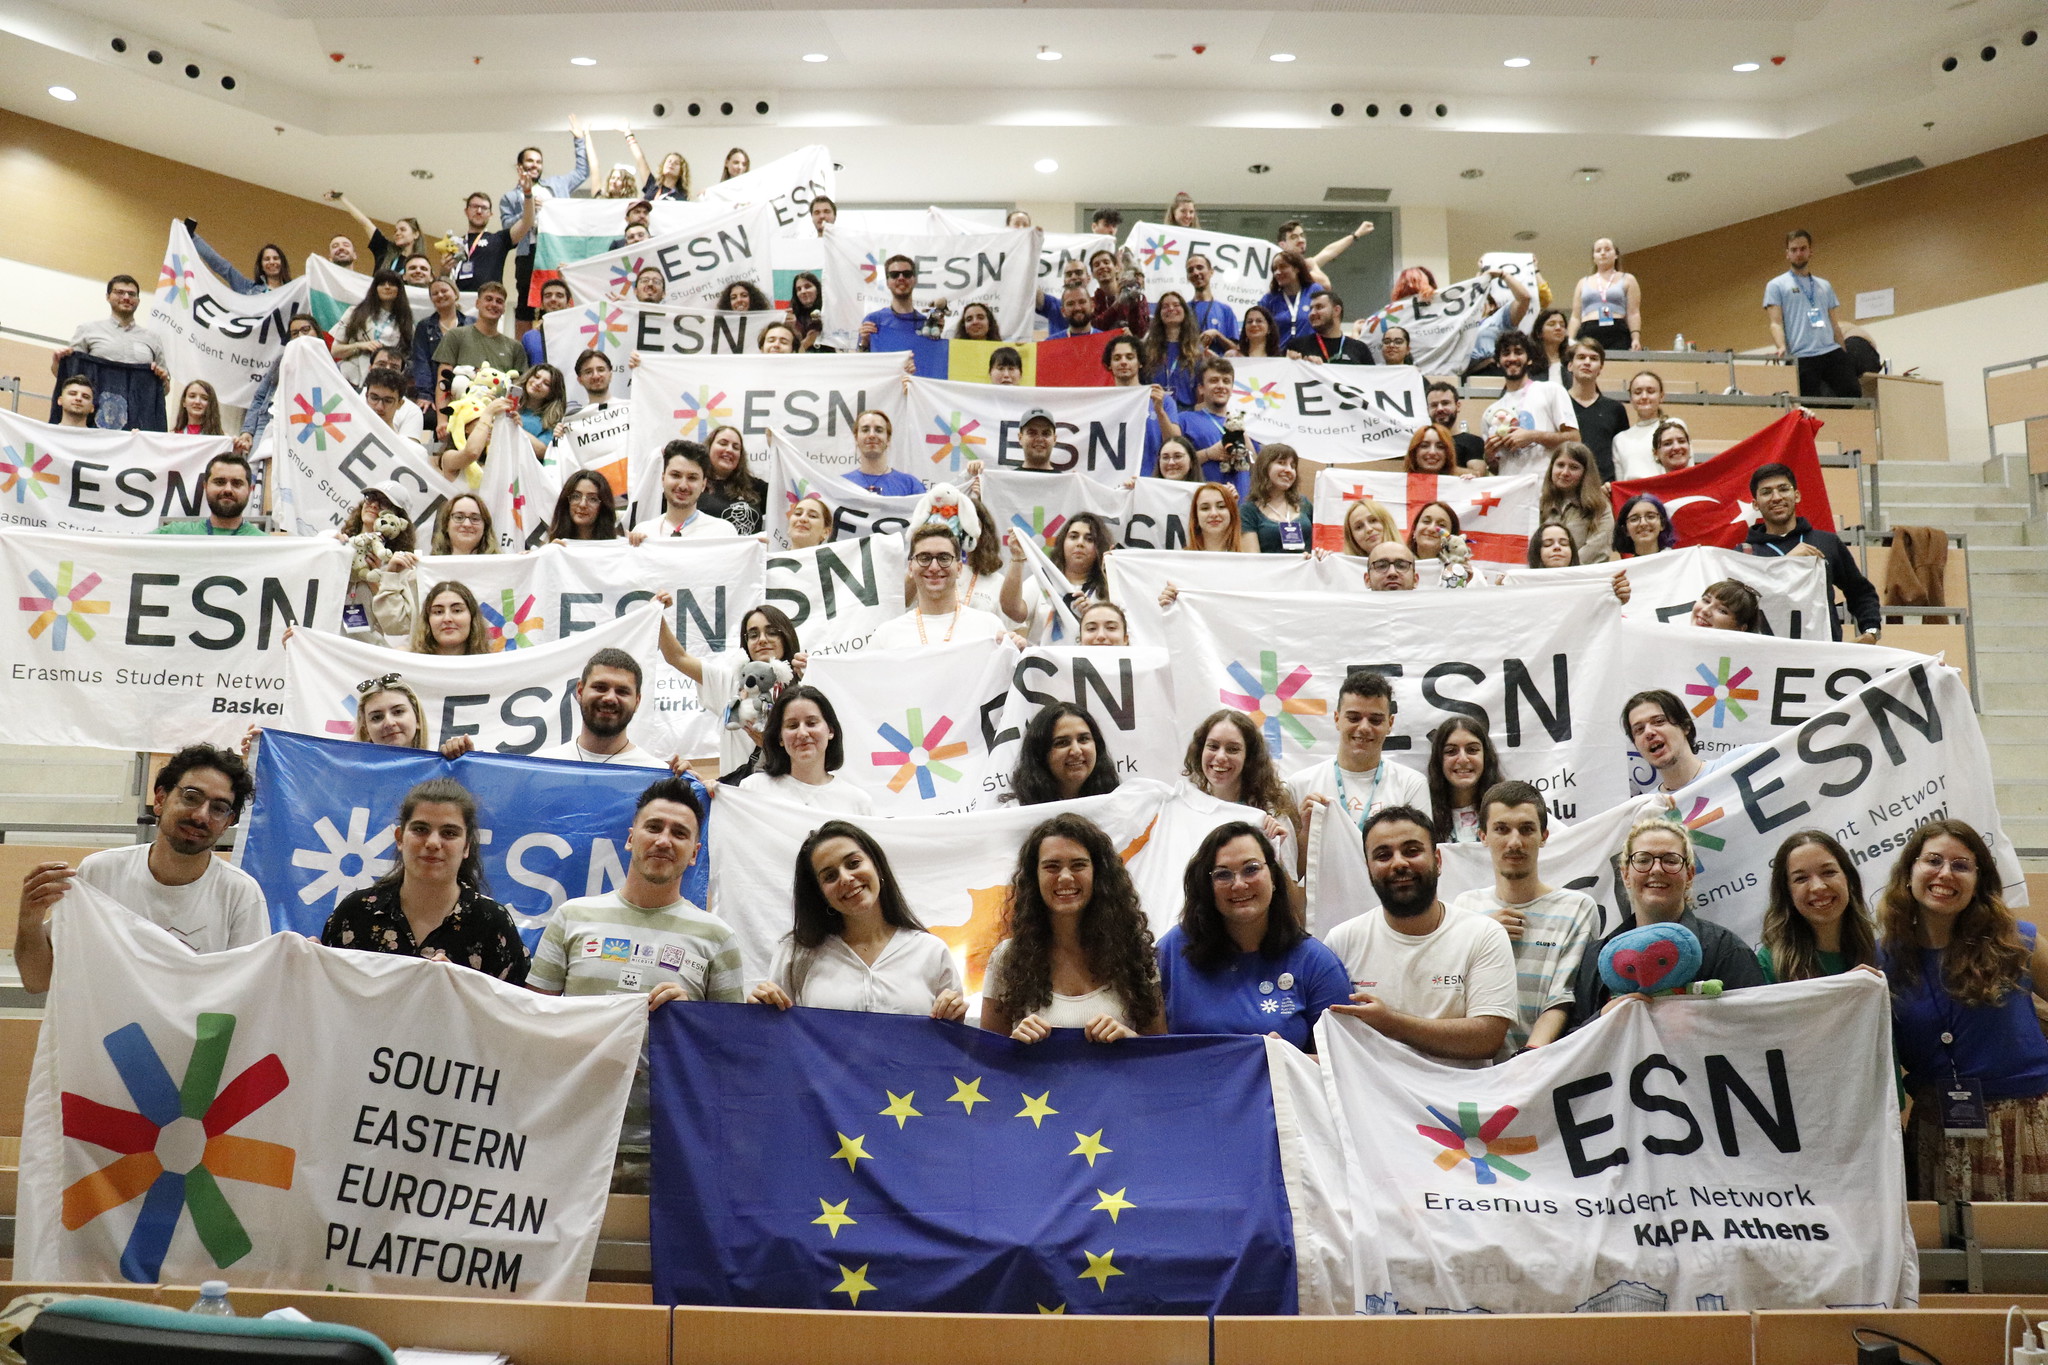 A big group of people holding ESN flags and posing for a picture.